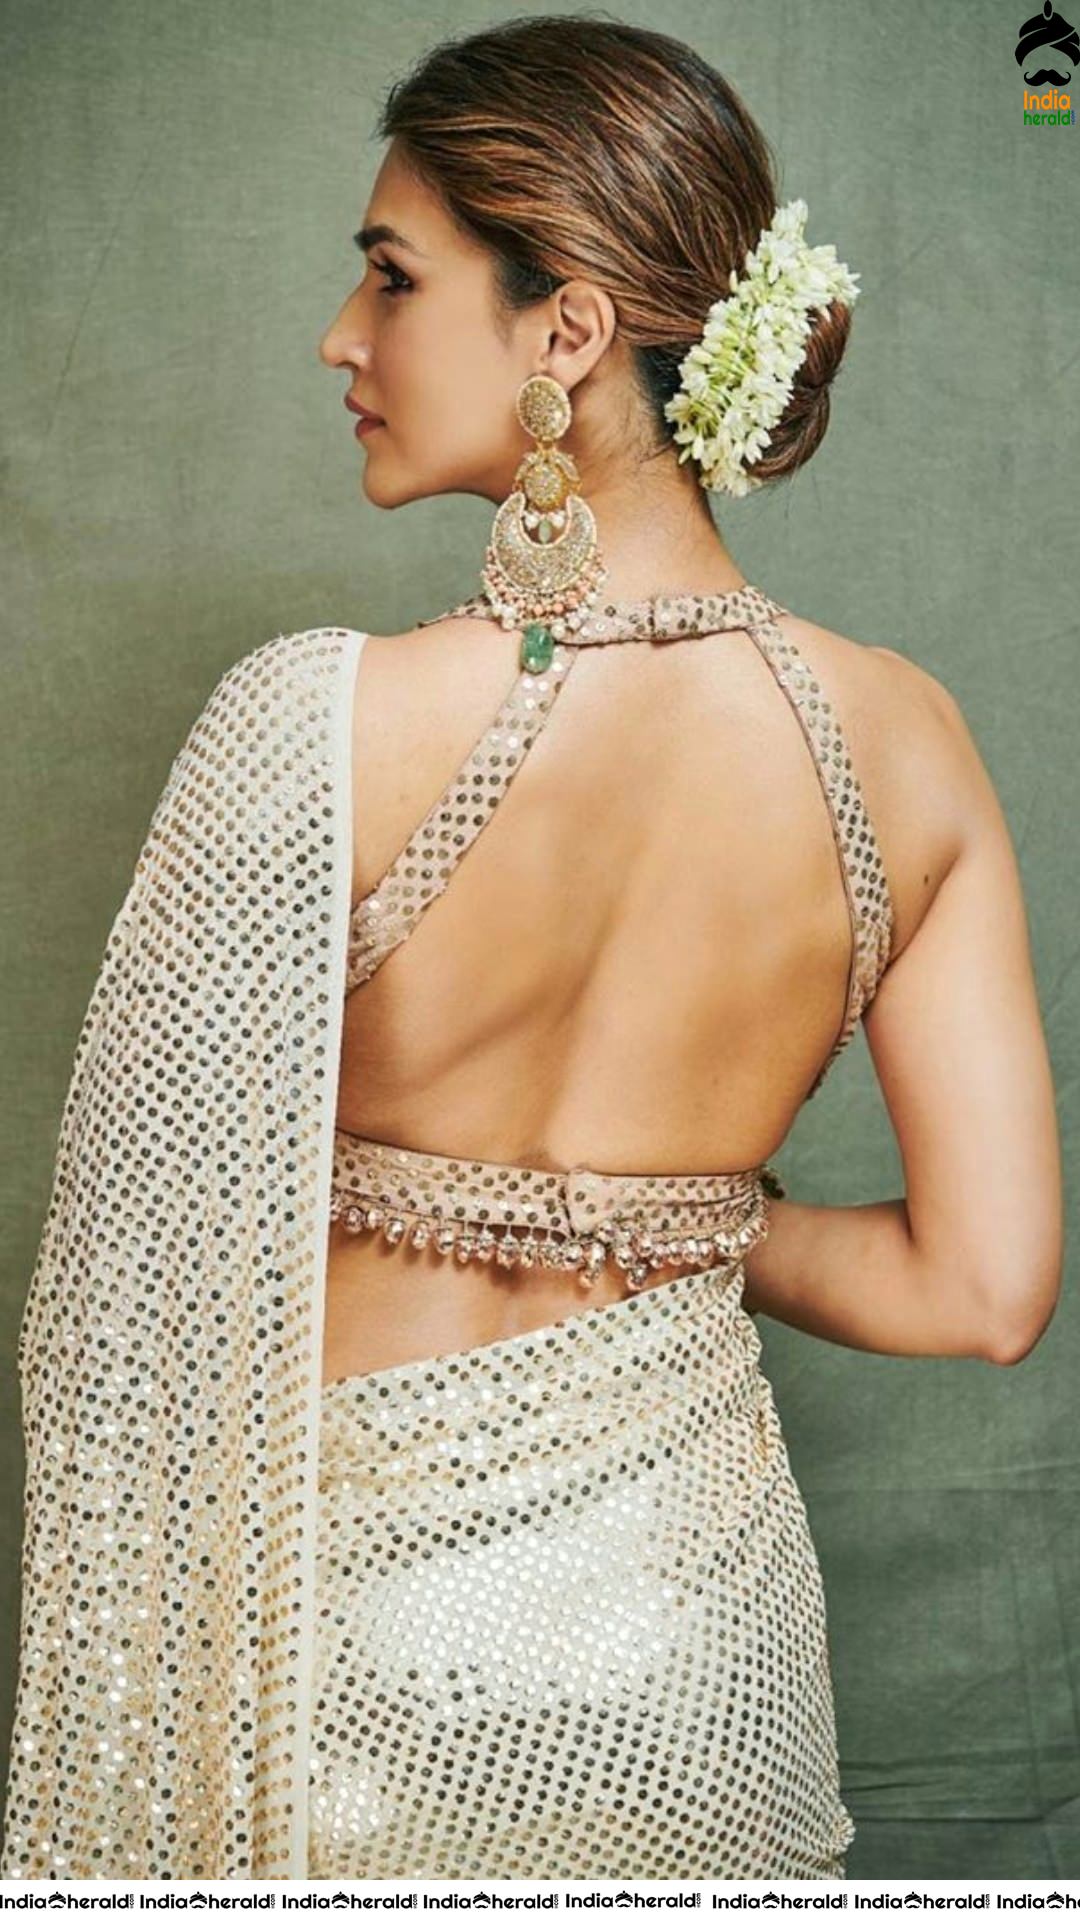 Kriti Sanon Looking Buoyant and Too Hot in Backless Blouse Saree